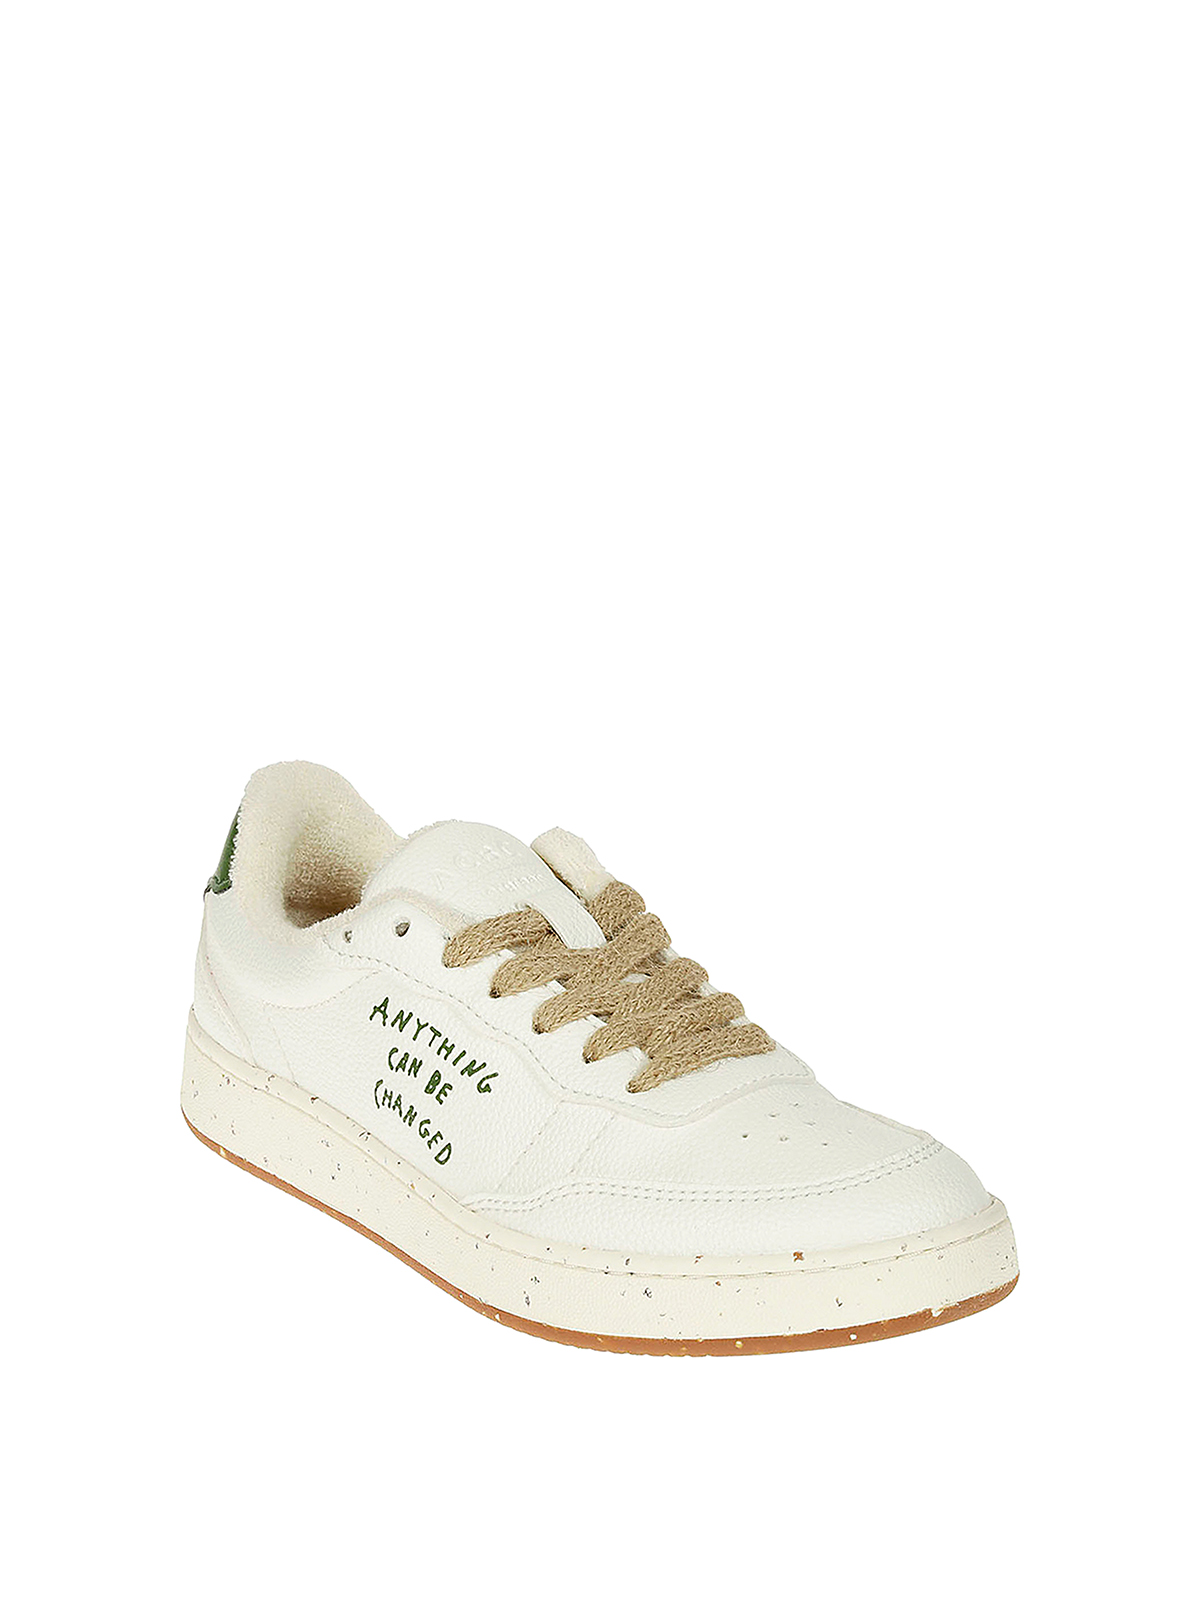 Shop Acbc Sneakers In Green